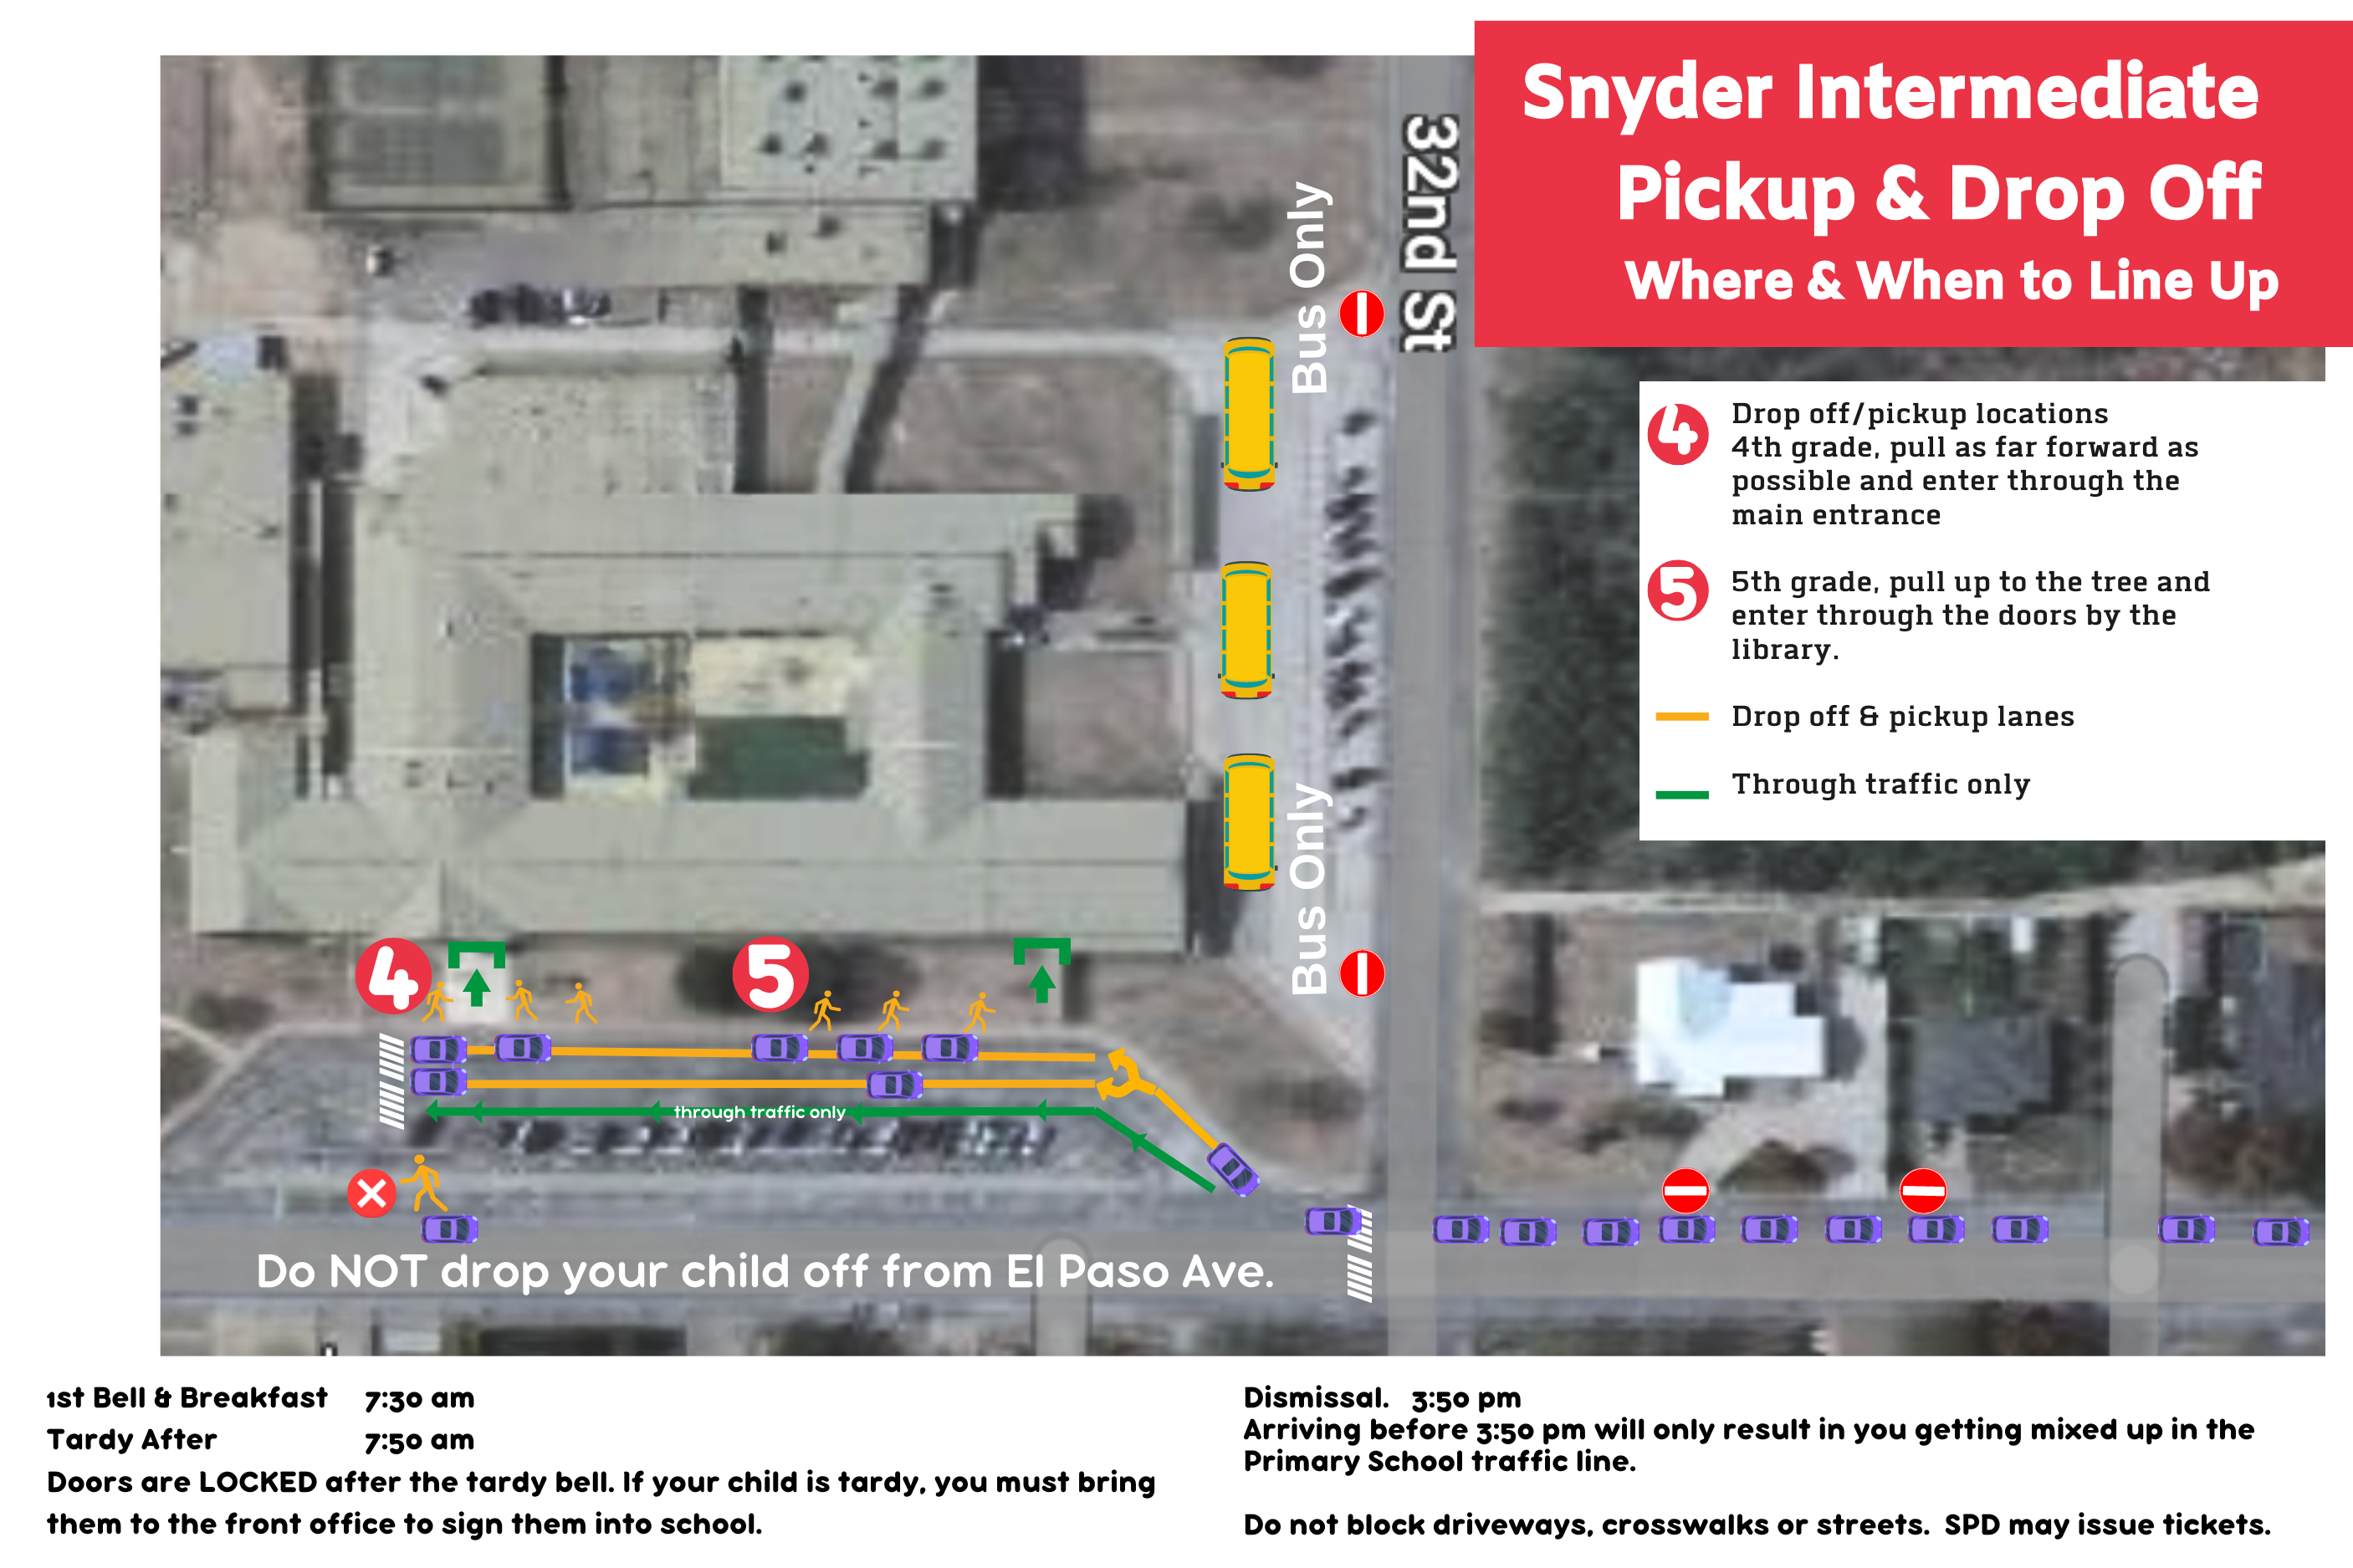 this map explains safety procedures at SIS.  Please contact the principal with questions or assistance